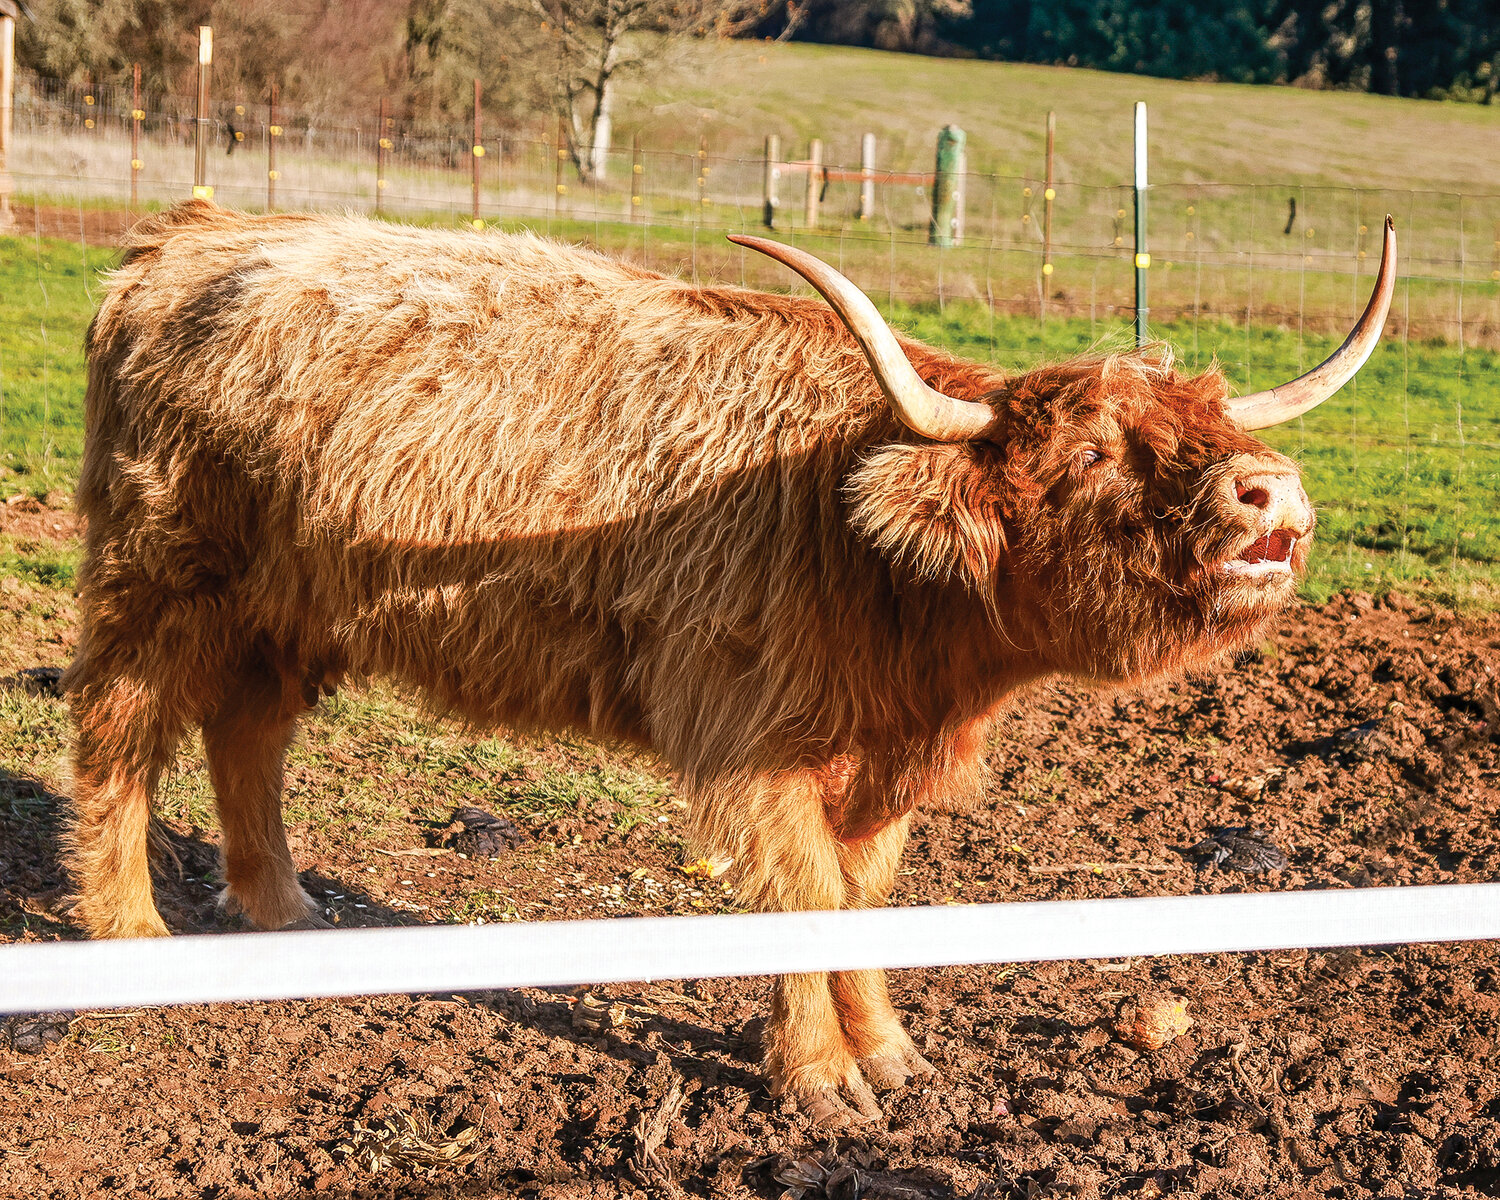 One of Mark Lopez’s Highland cows “moos” for more apples on Tuesday, Nov. 28 at Gather and Feast Farm in La Center.